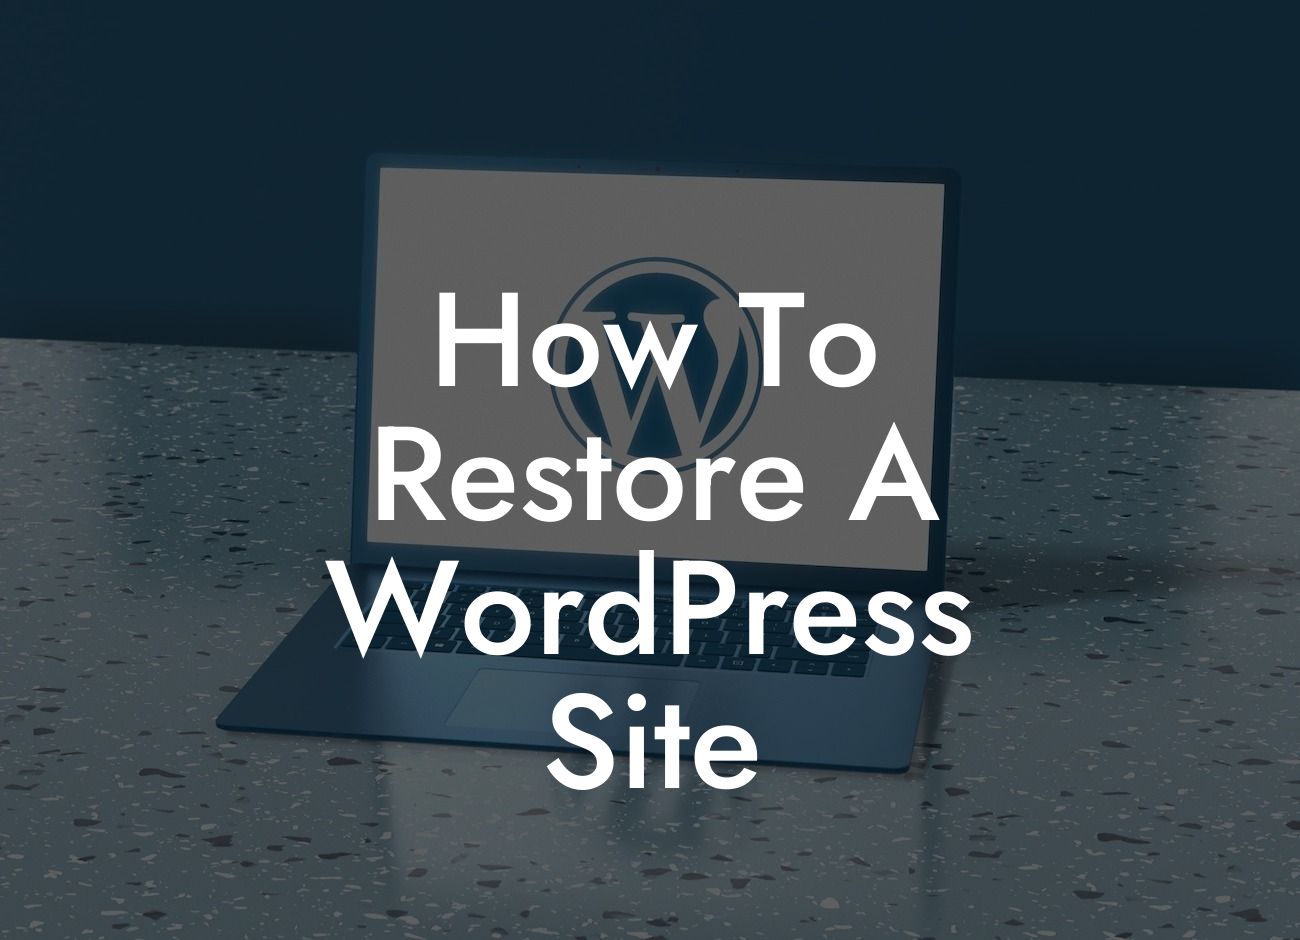 How To Restore A WordPress Site